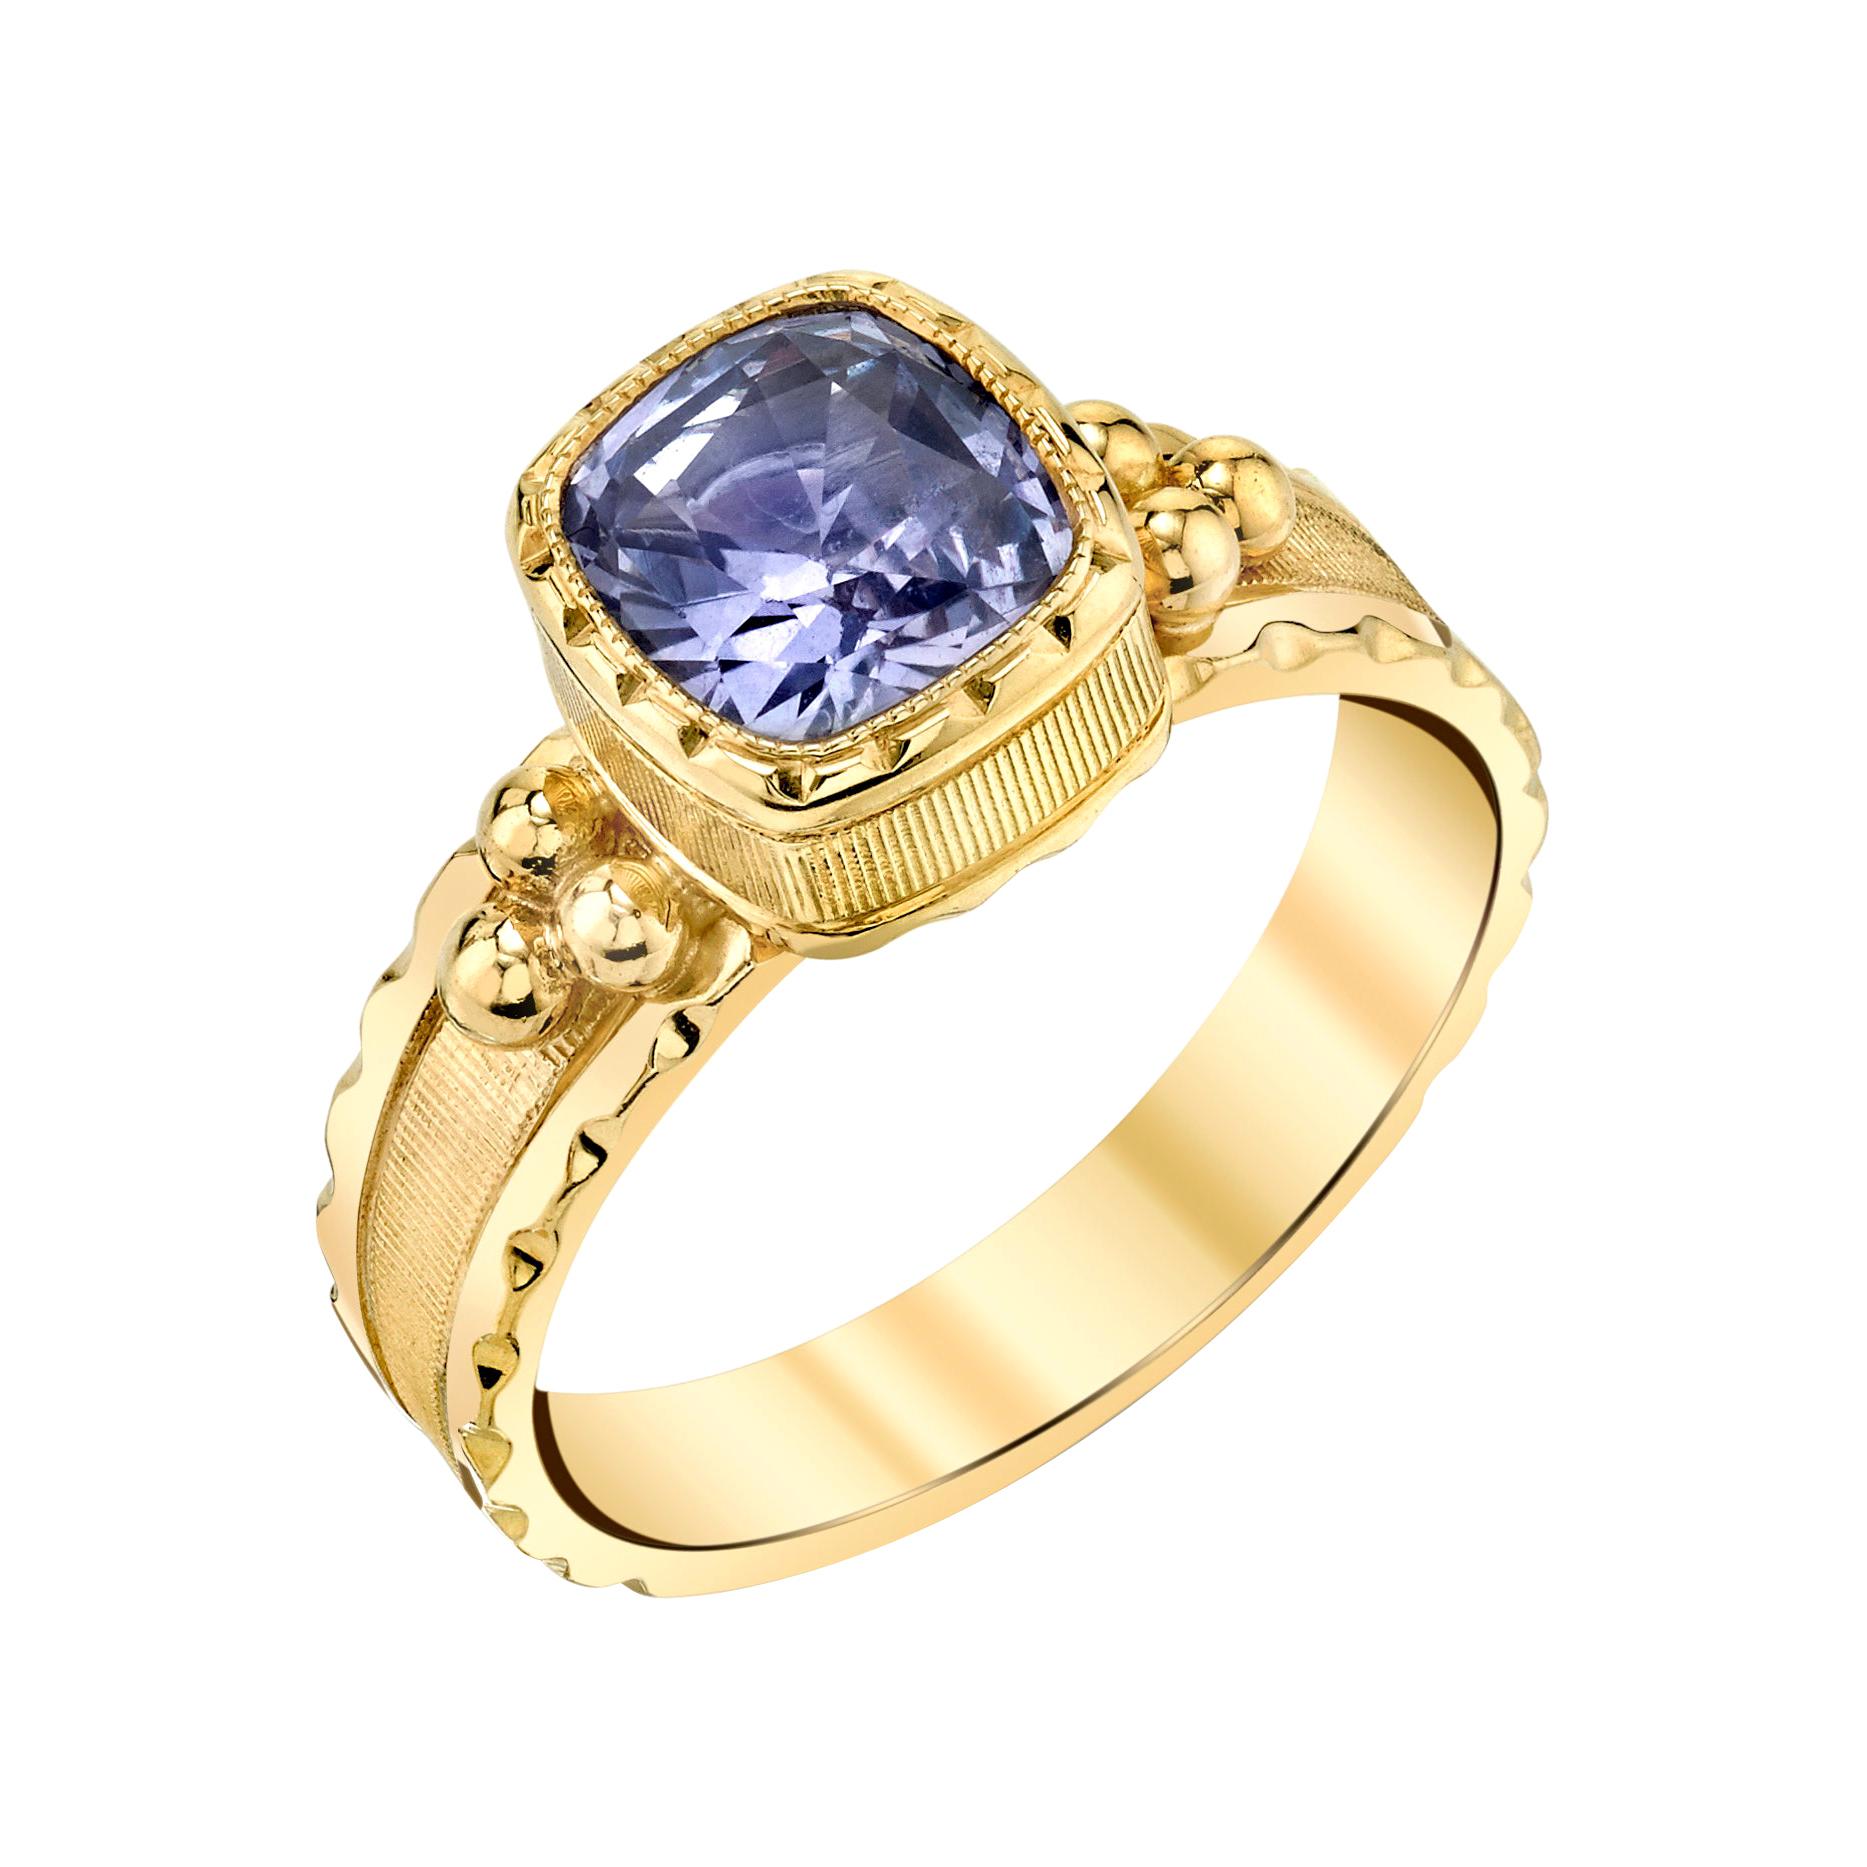 1.90 Carat Fancy Violet Sapphire and 18k Yellow Gold Handmade Ring